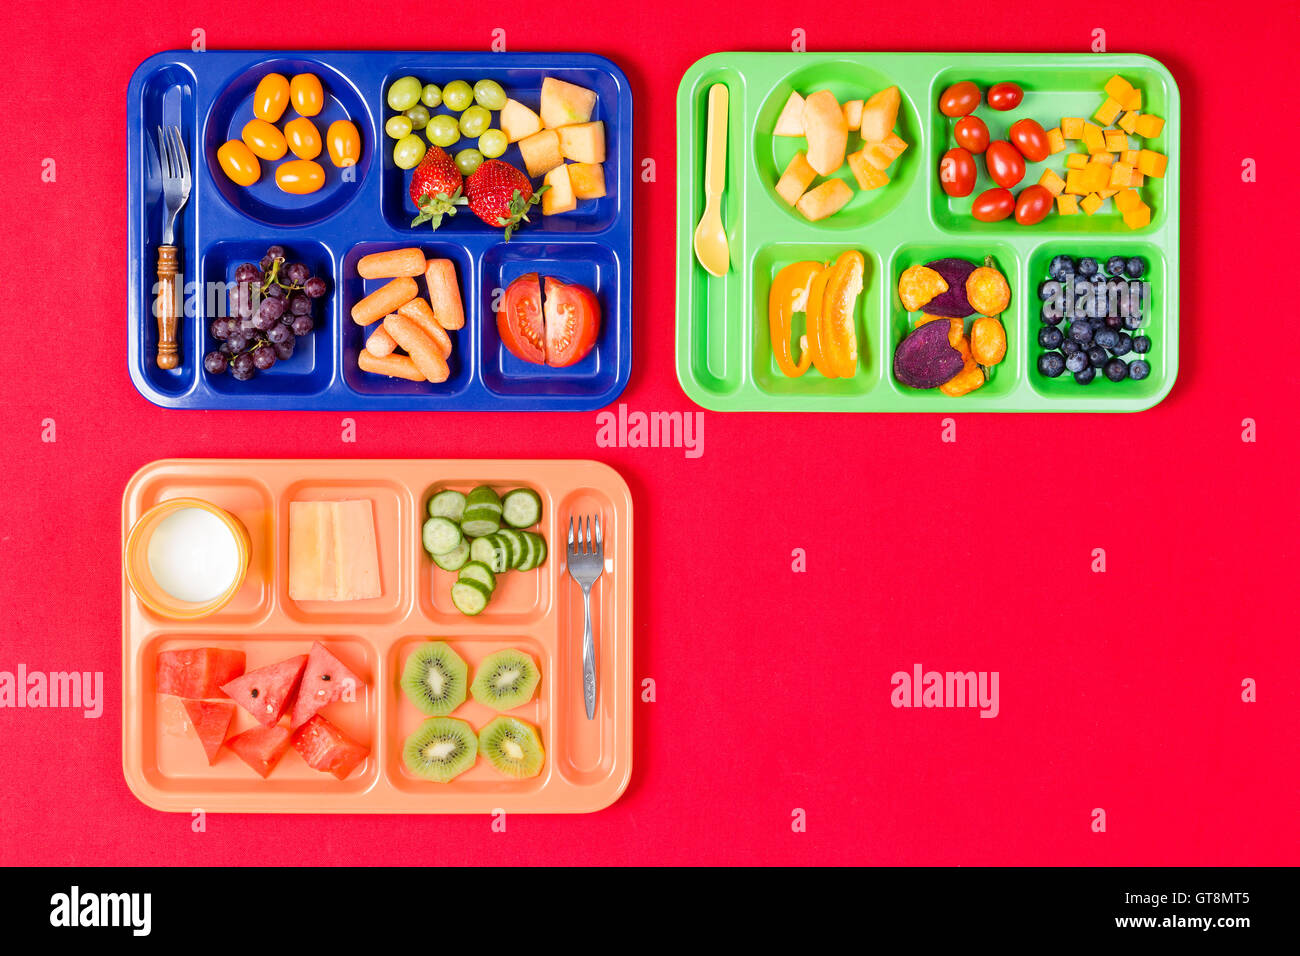 https://c8.alamy.com/comp/GT8MT5/three-plastic-colorful-kids-lunch-trays-filled-with-tomatoes-grapes-GT8MT5.jpg